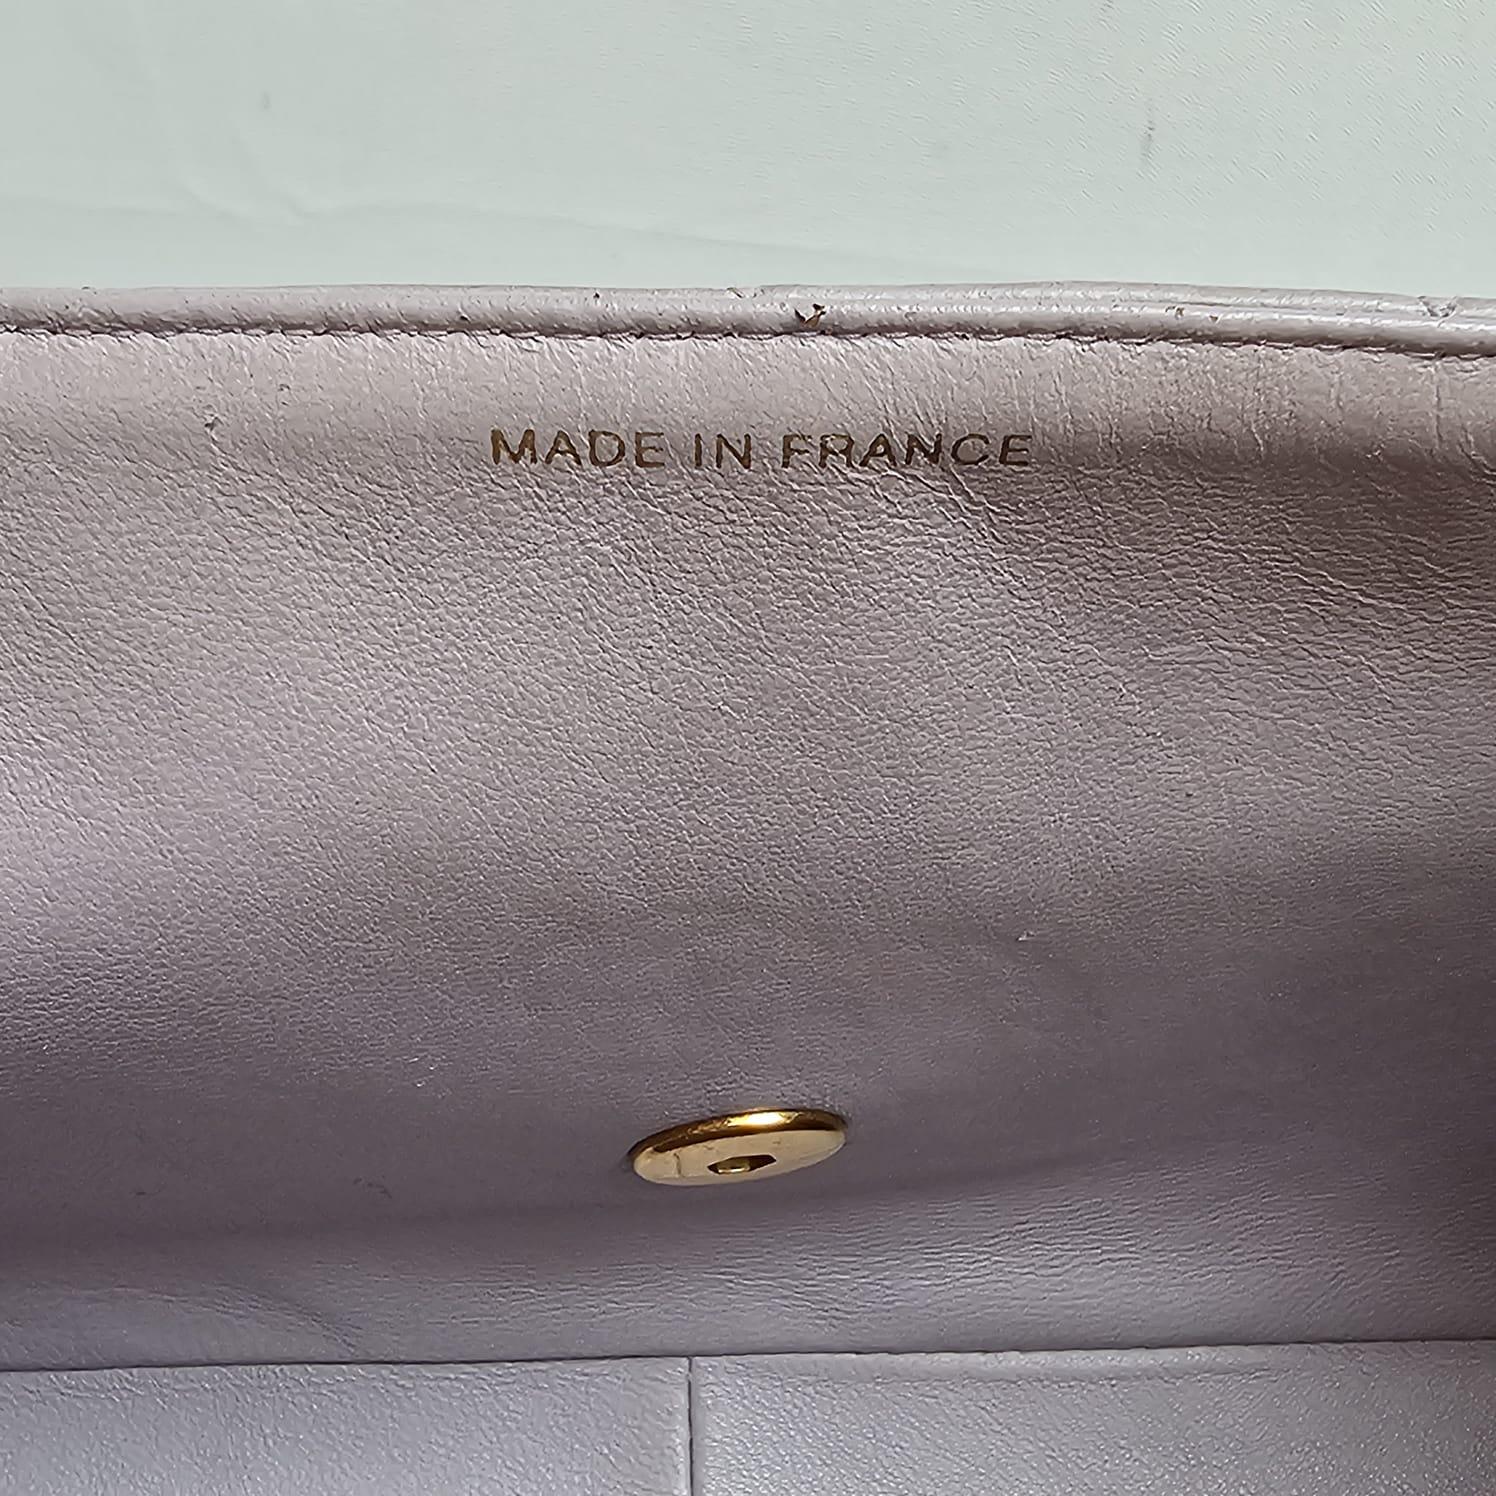 Rare diana bag in lilac color with gold hardware. Great condition overall with light creasing and rubbing marks on the corners. Overall in good vintage condition. Series #4. Comes with its card and holo sticker.